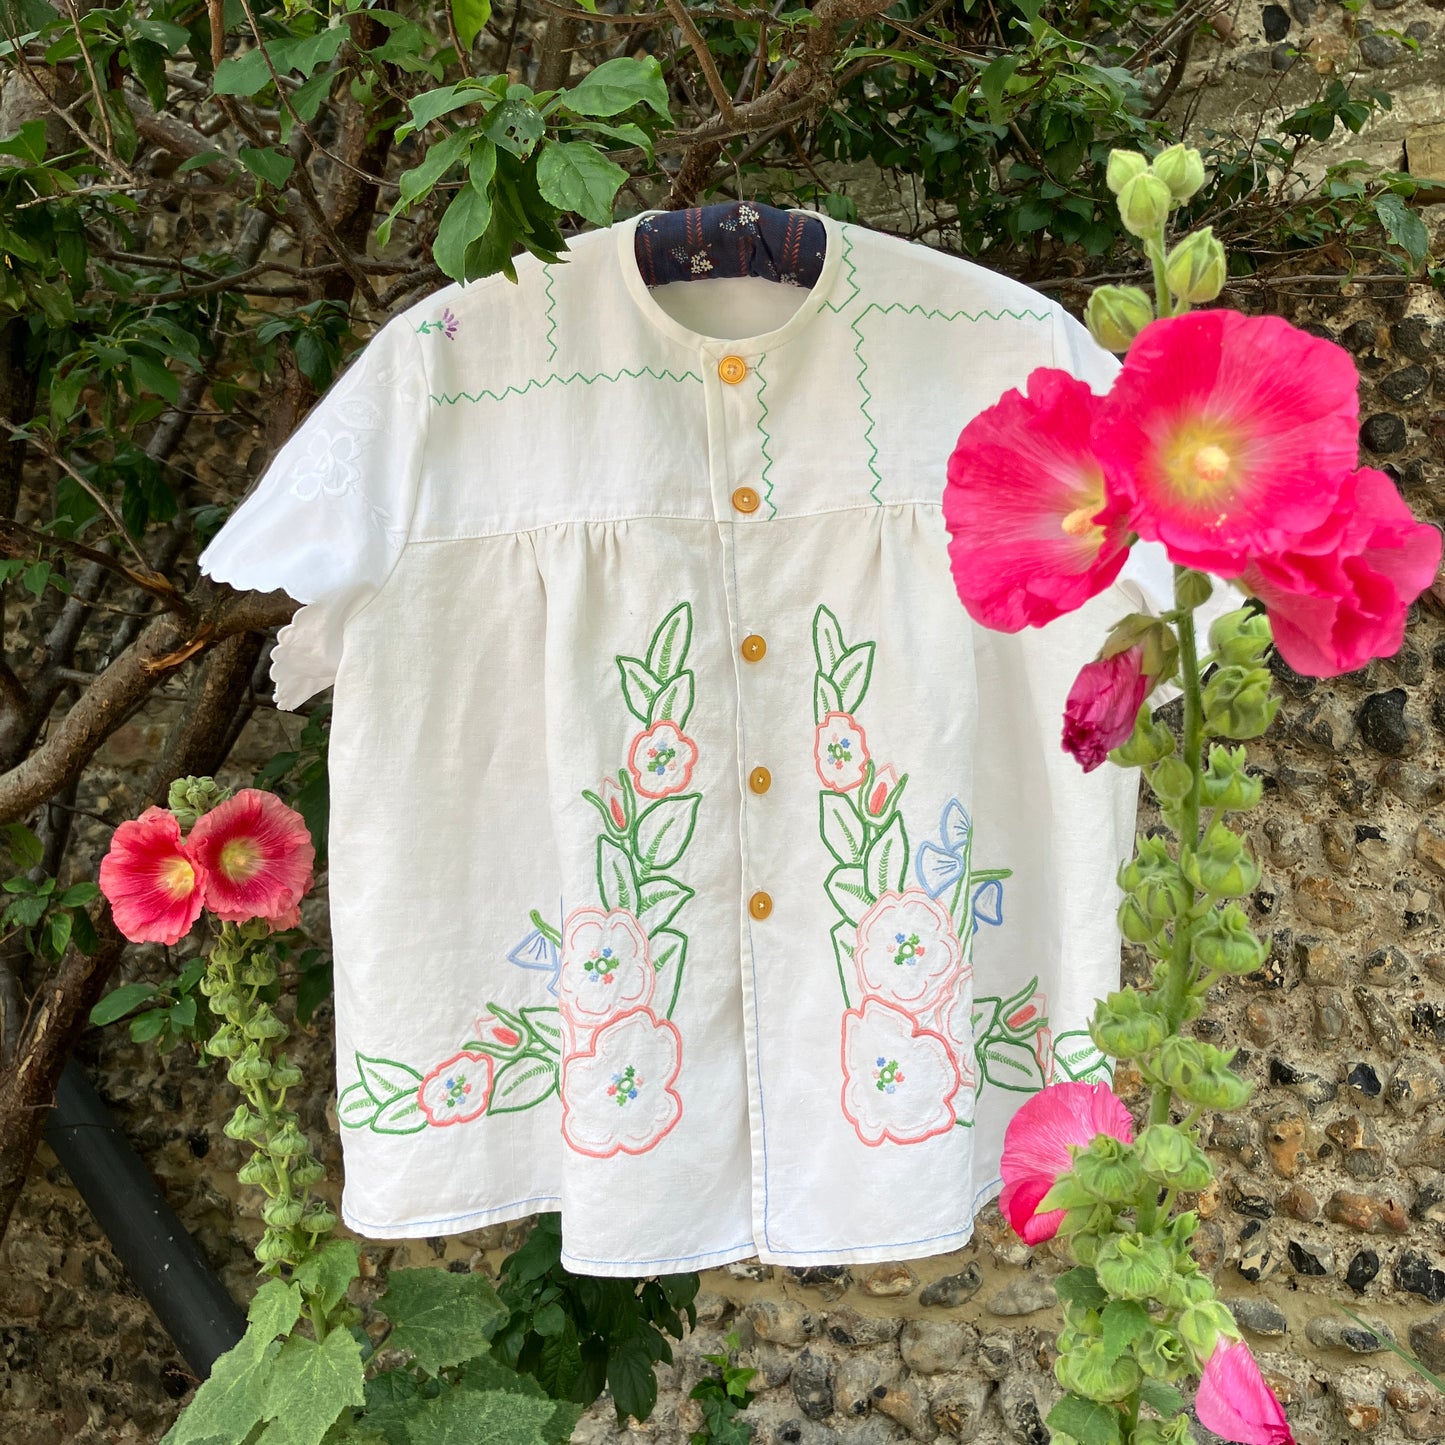 Swingy top made from found repurposed vintage tablecloths with embroidery and cutwork motifs.